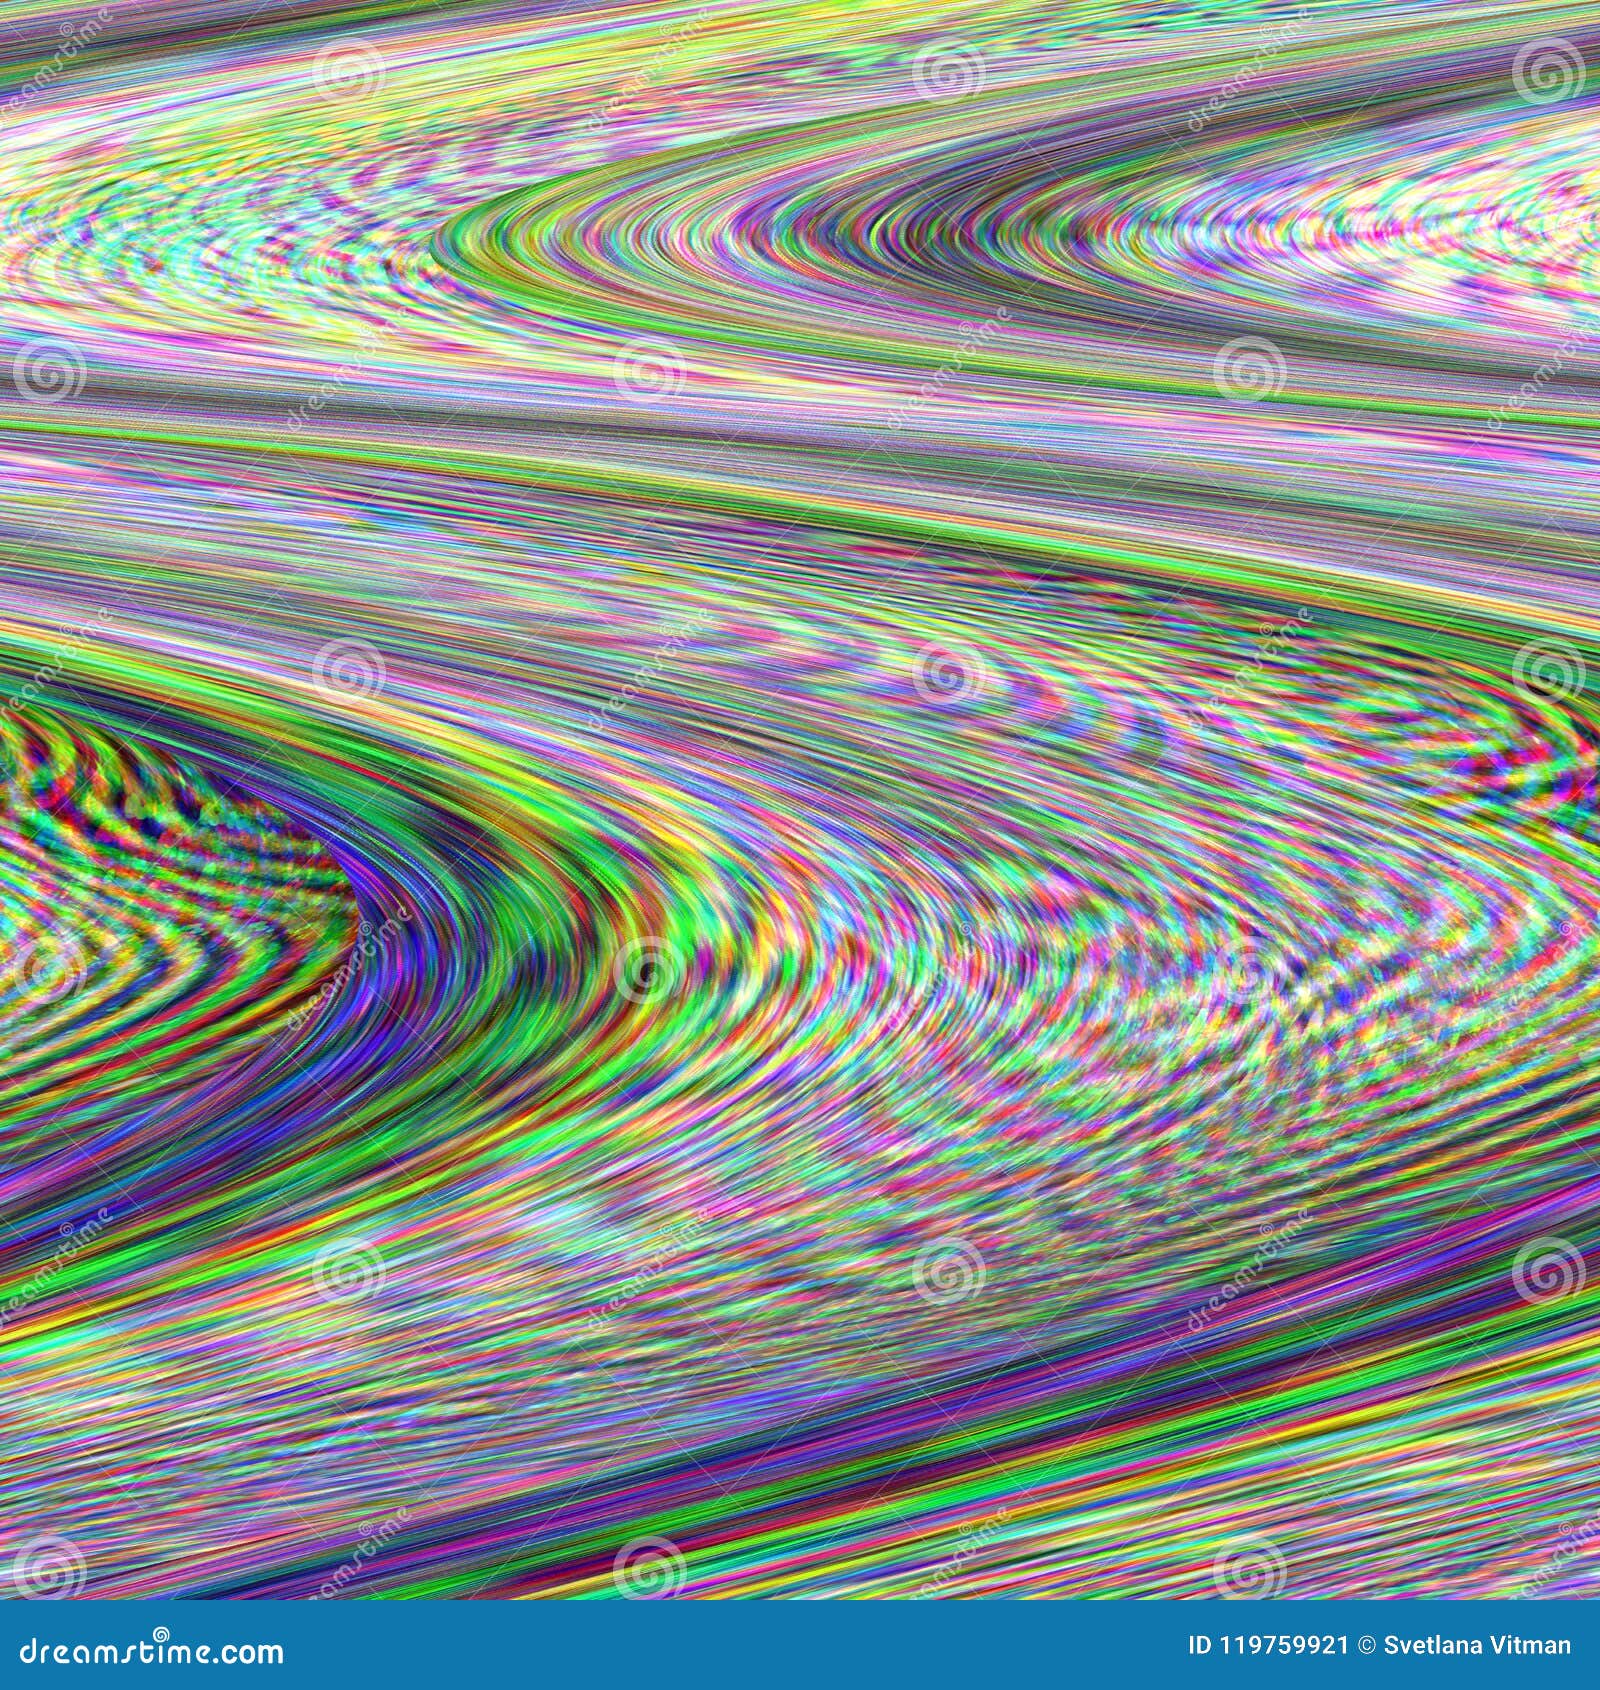 Glitch background computer screen error digital pixel noise abstract design  photo glitch television signal fail data decay  CanStock